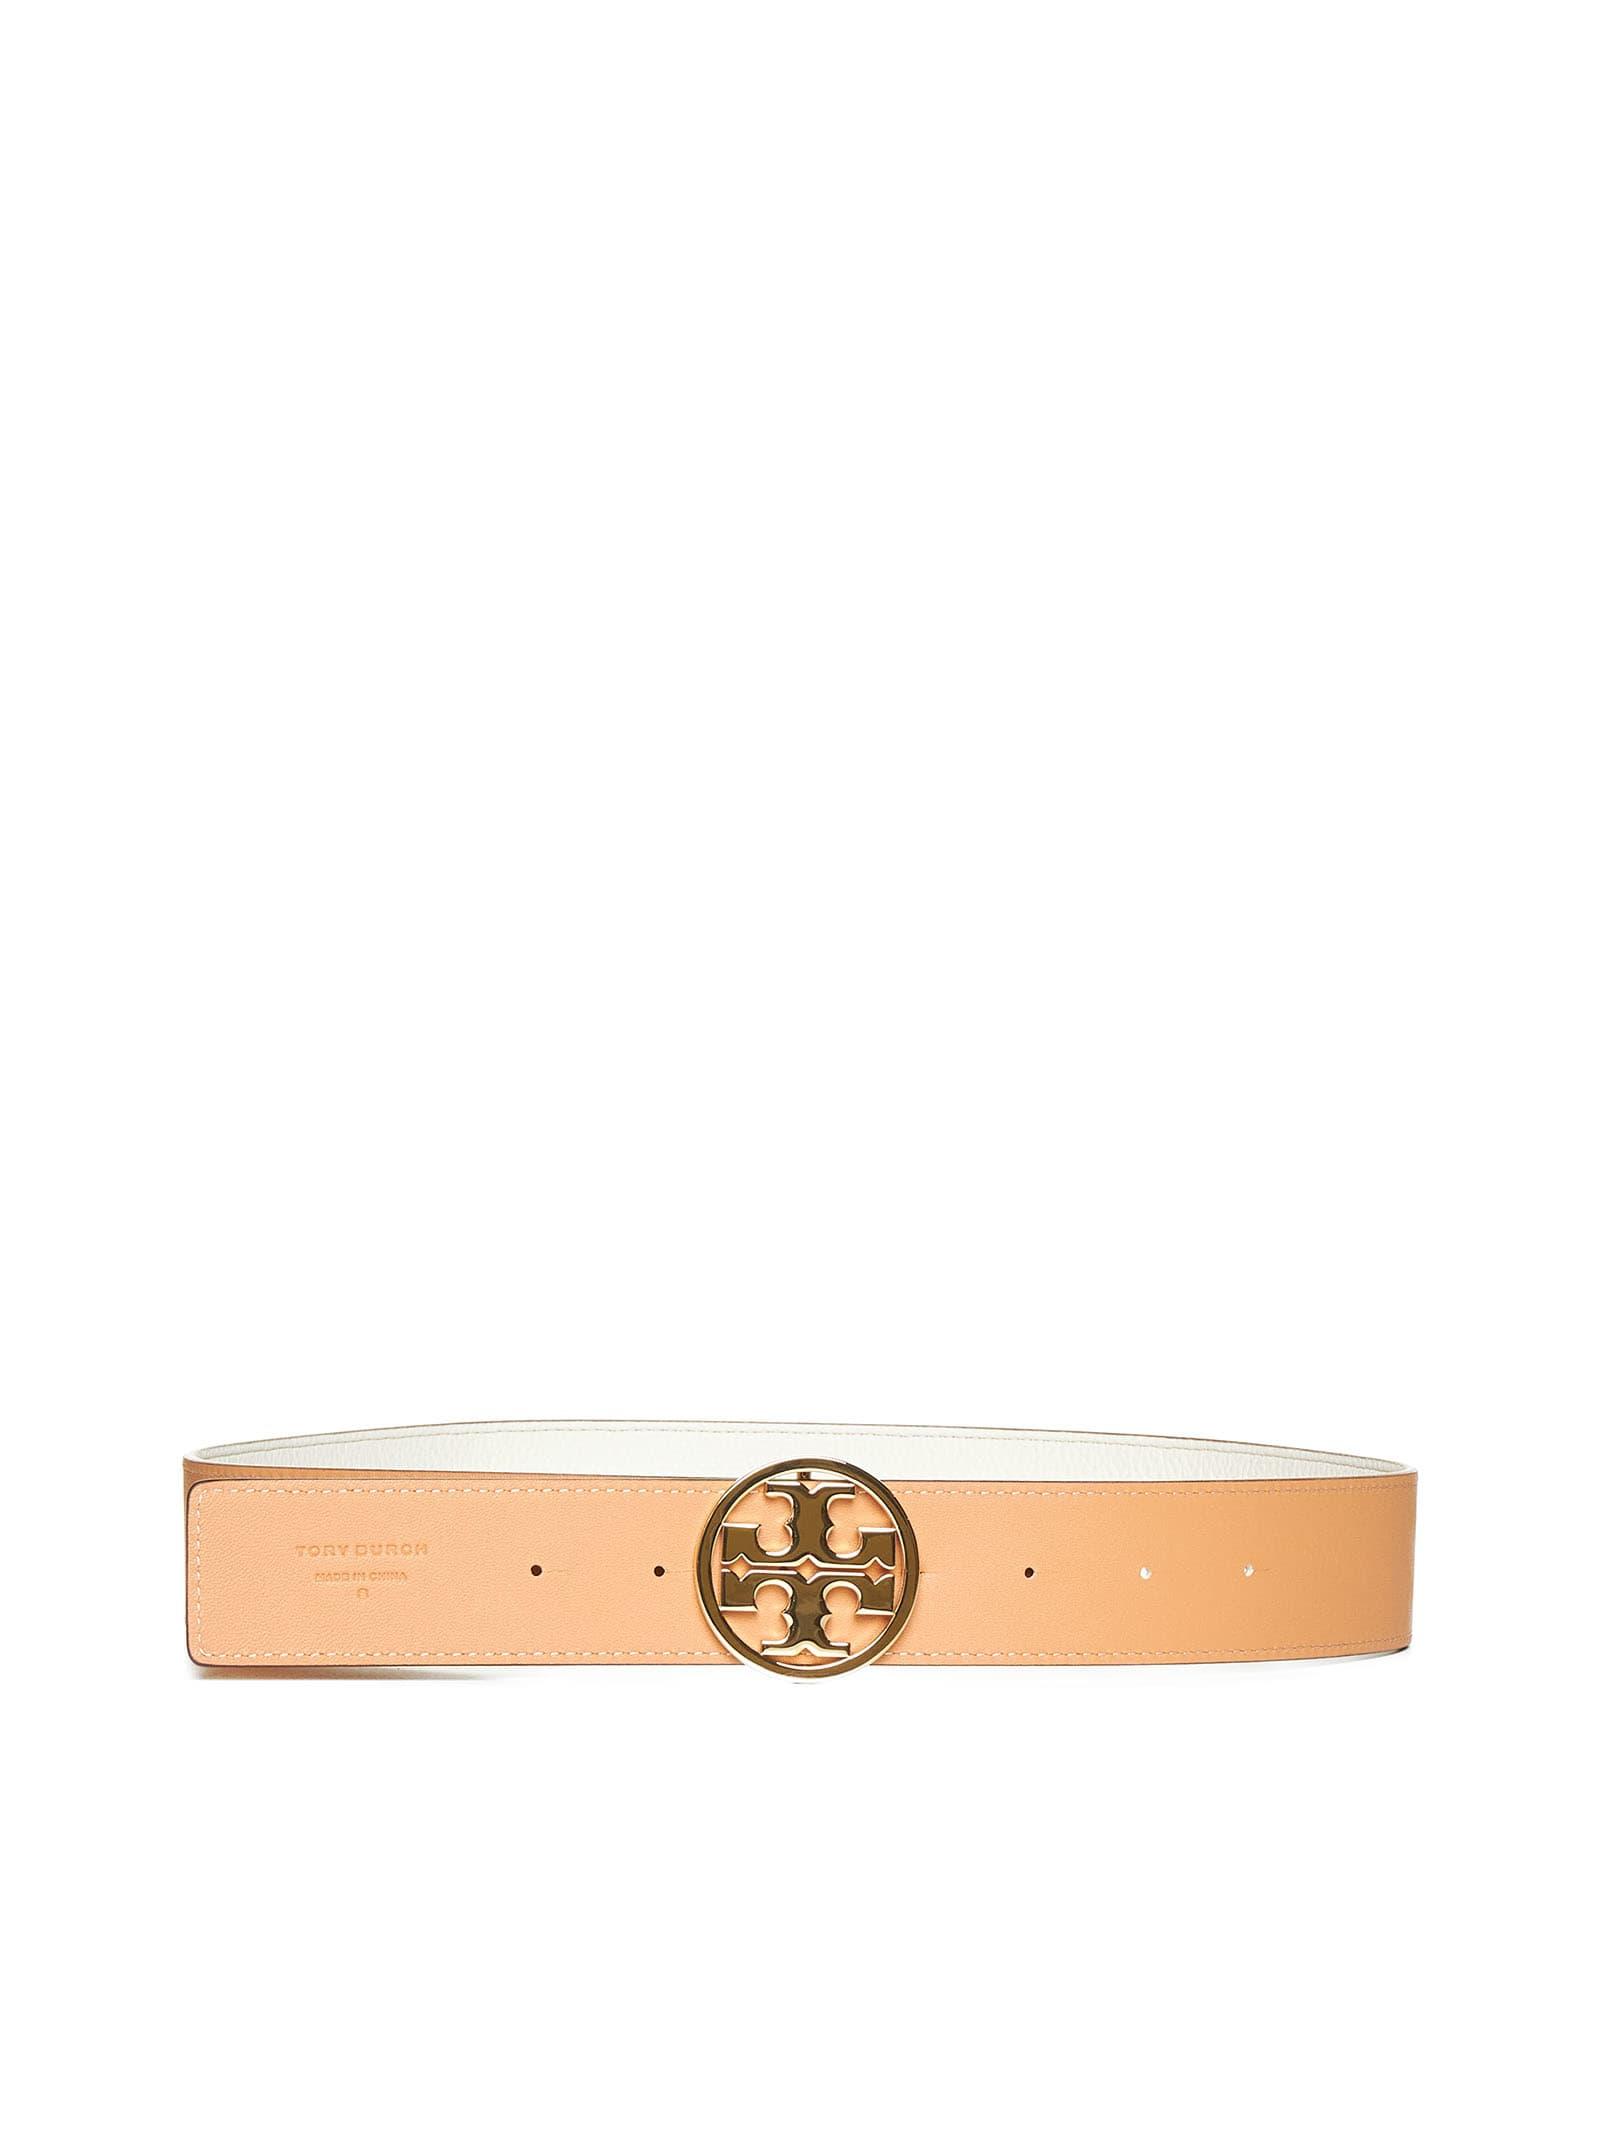 Tory Burch Miller Reversible Leather Belt in White | Lyst